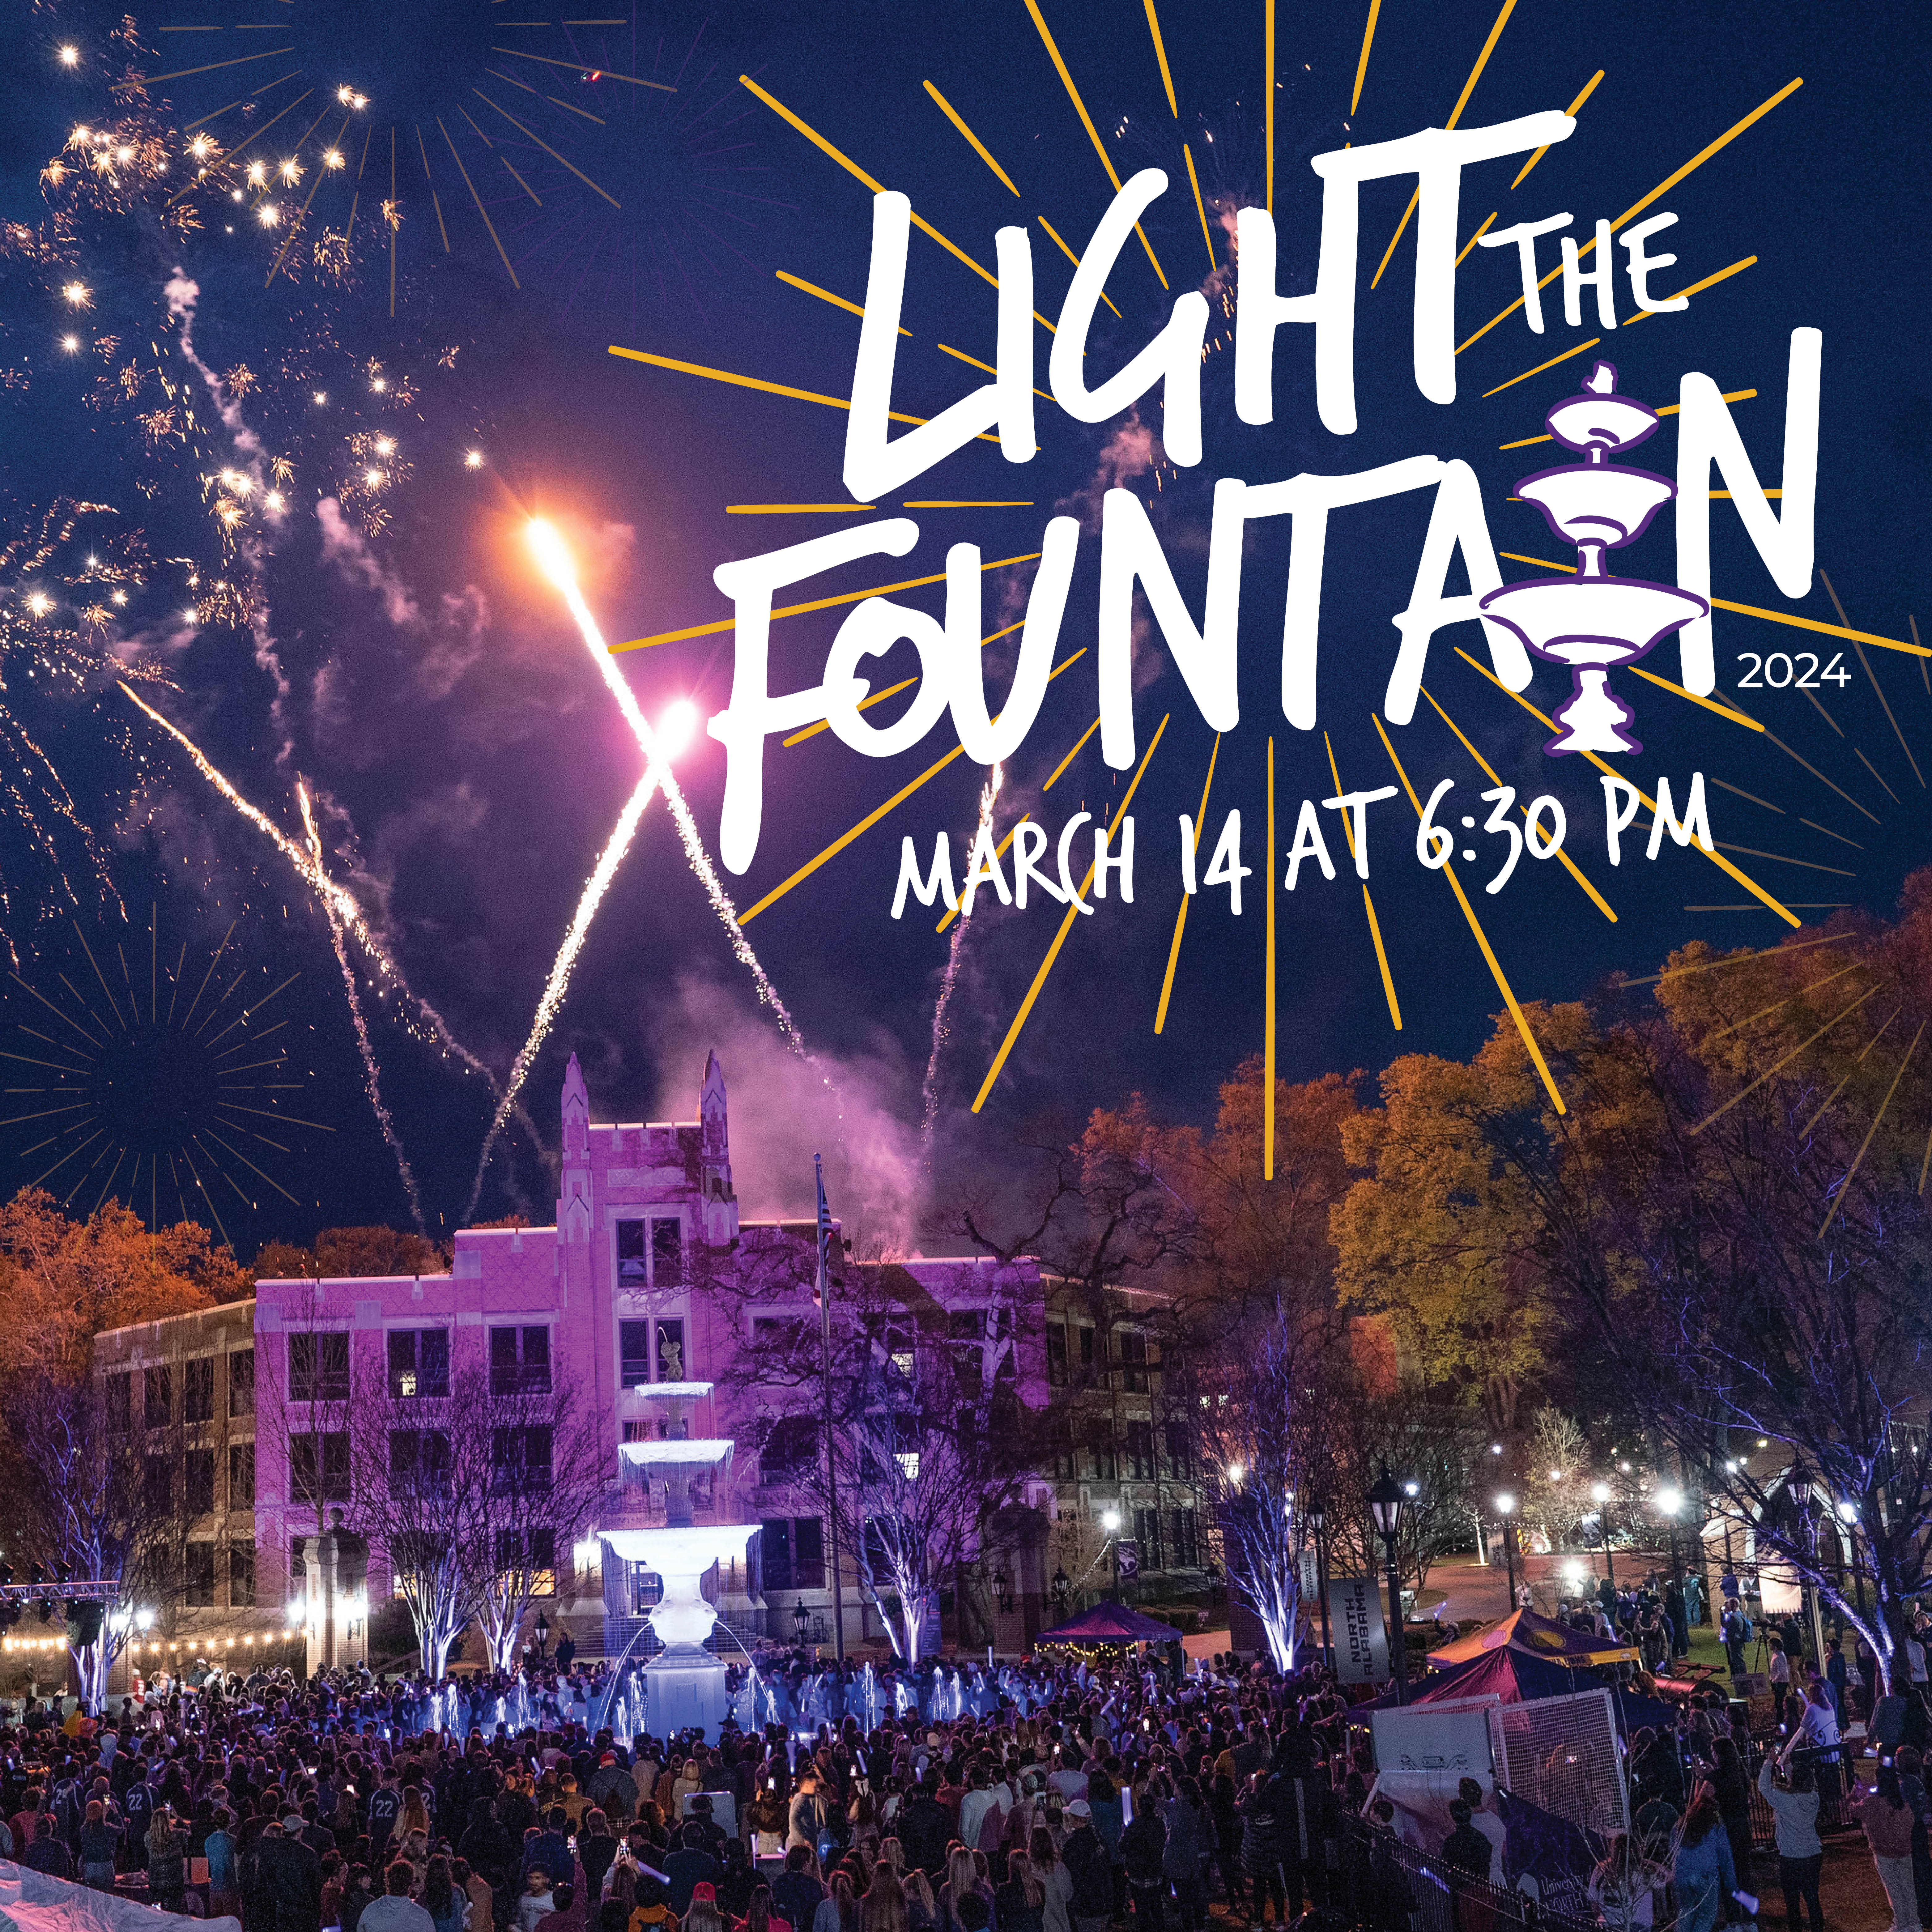 Light the Fountain, March 14, 6:30 p.m.